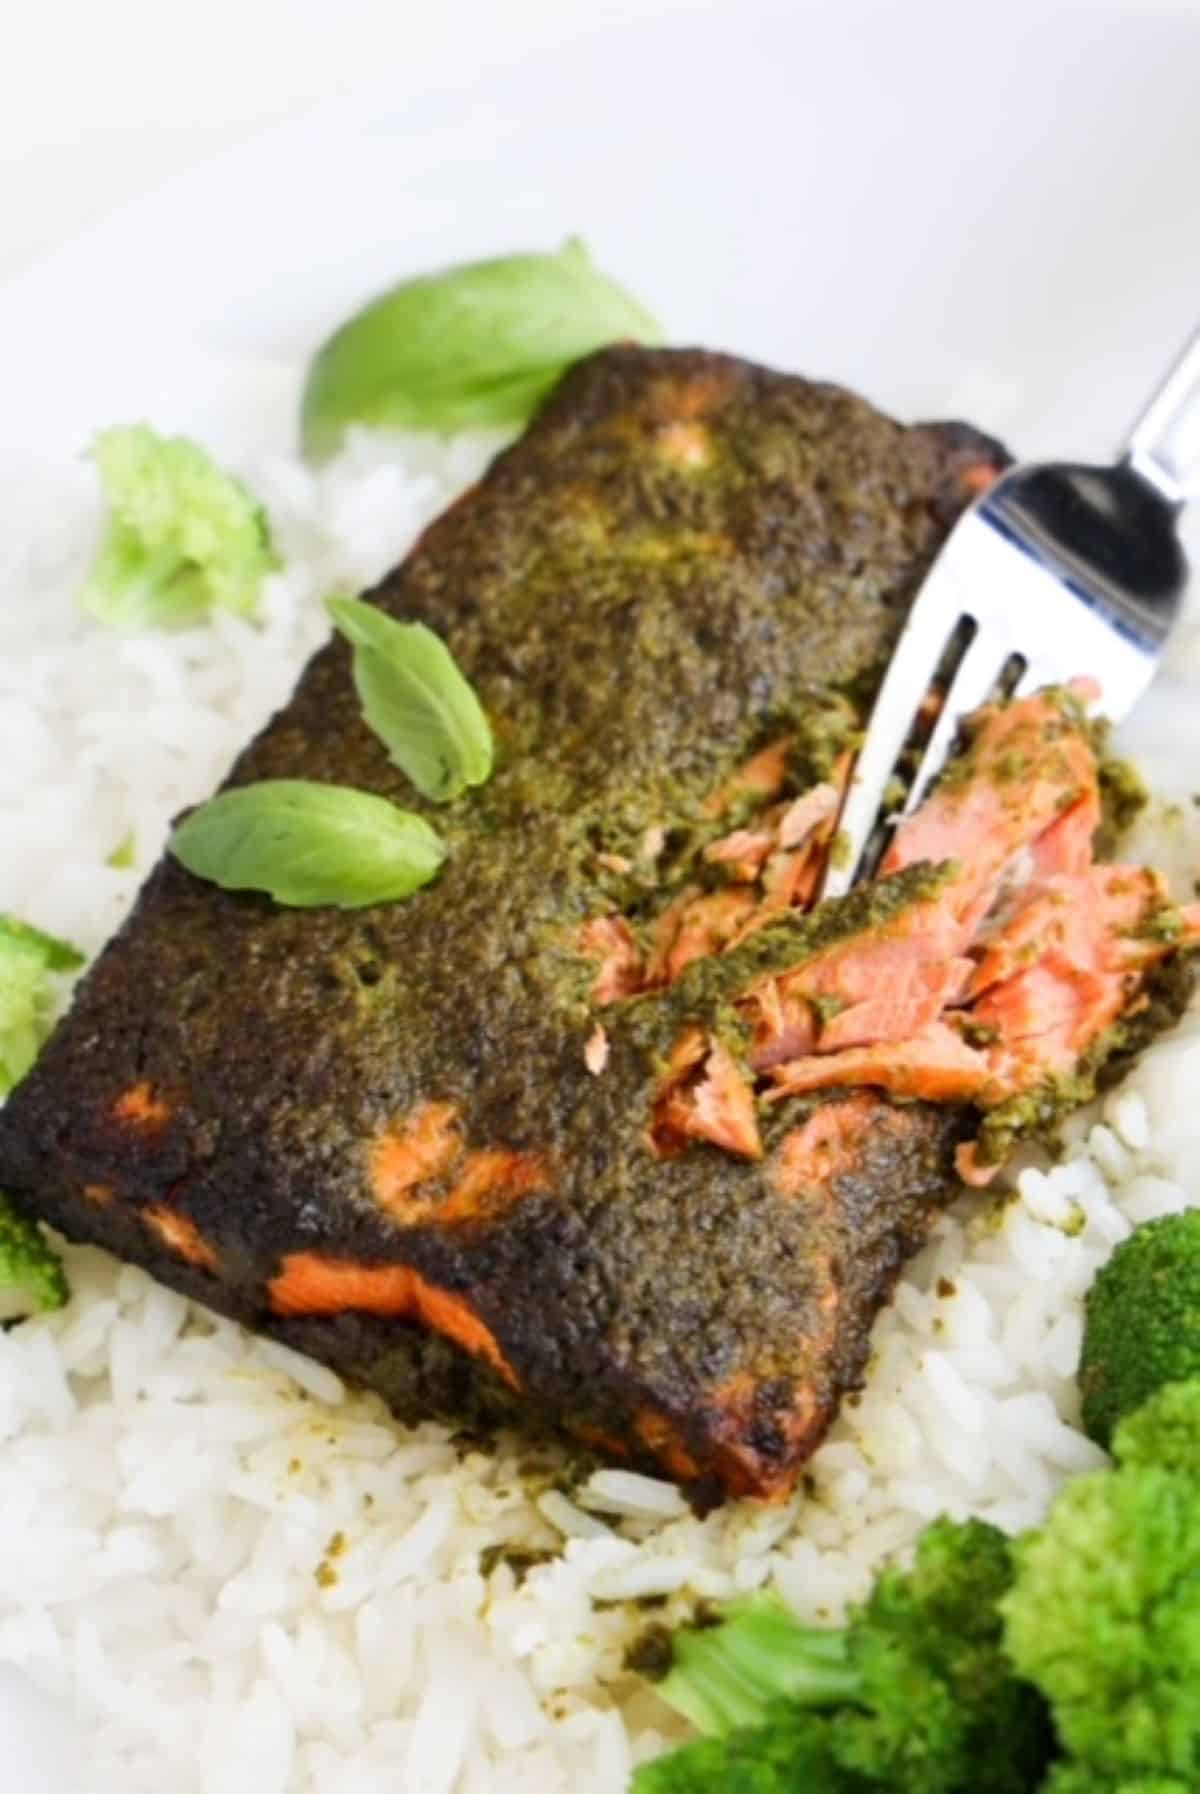 A fork cutting into a piece of cooked salmon topped with pesto.